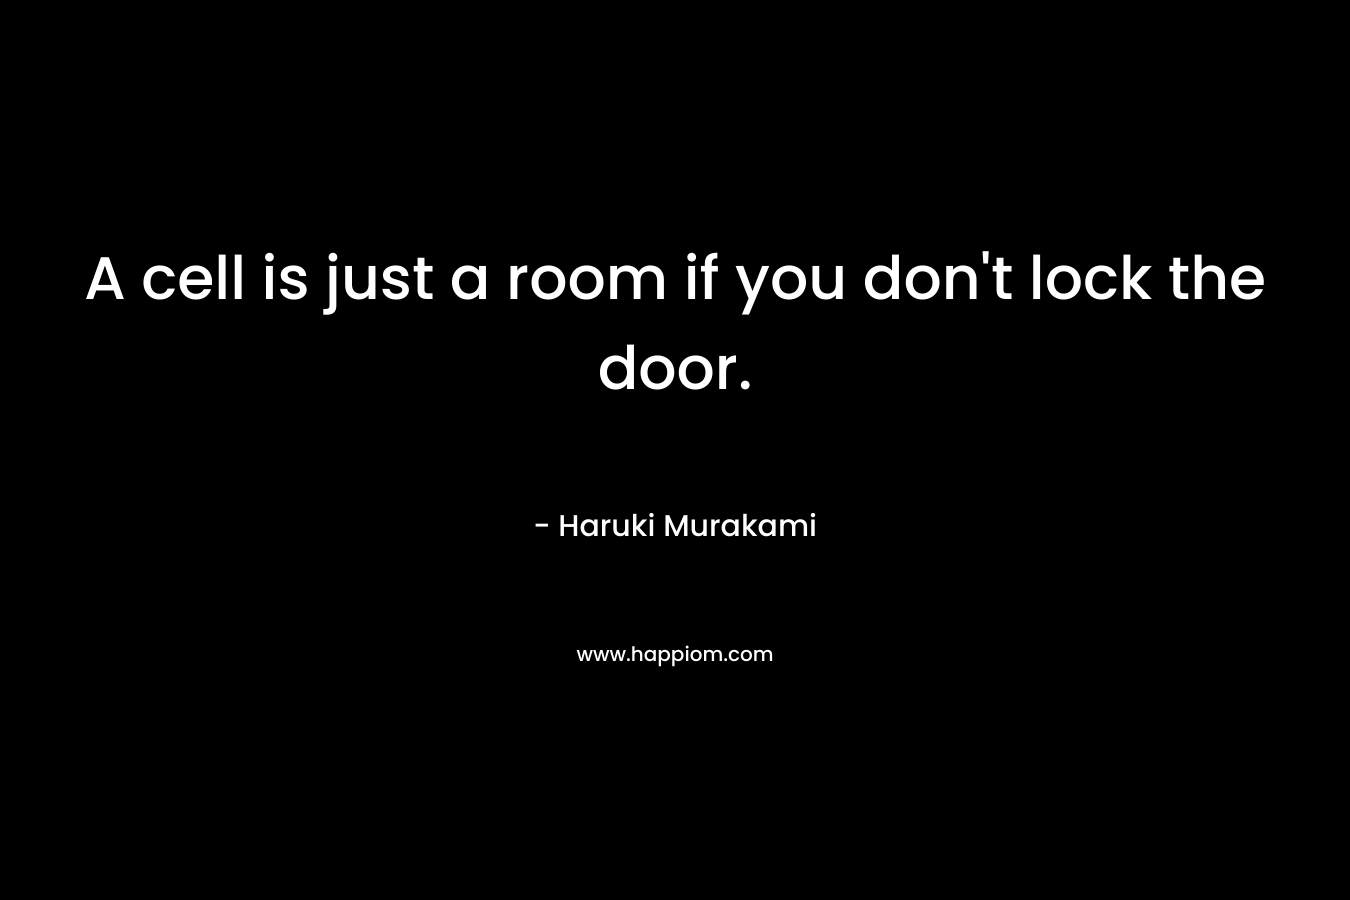 A cell is just a room if you don’t lock the door. – Haruki Murakami